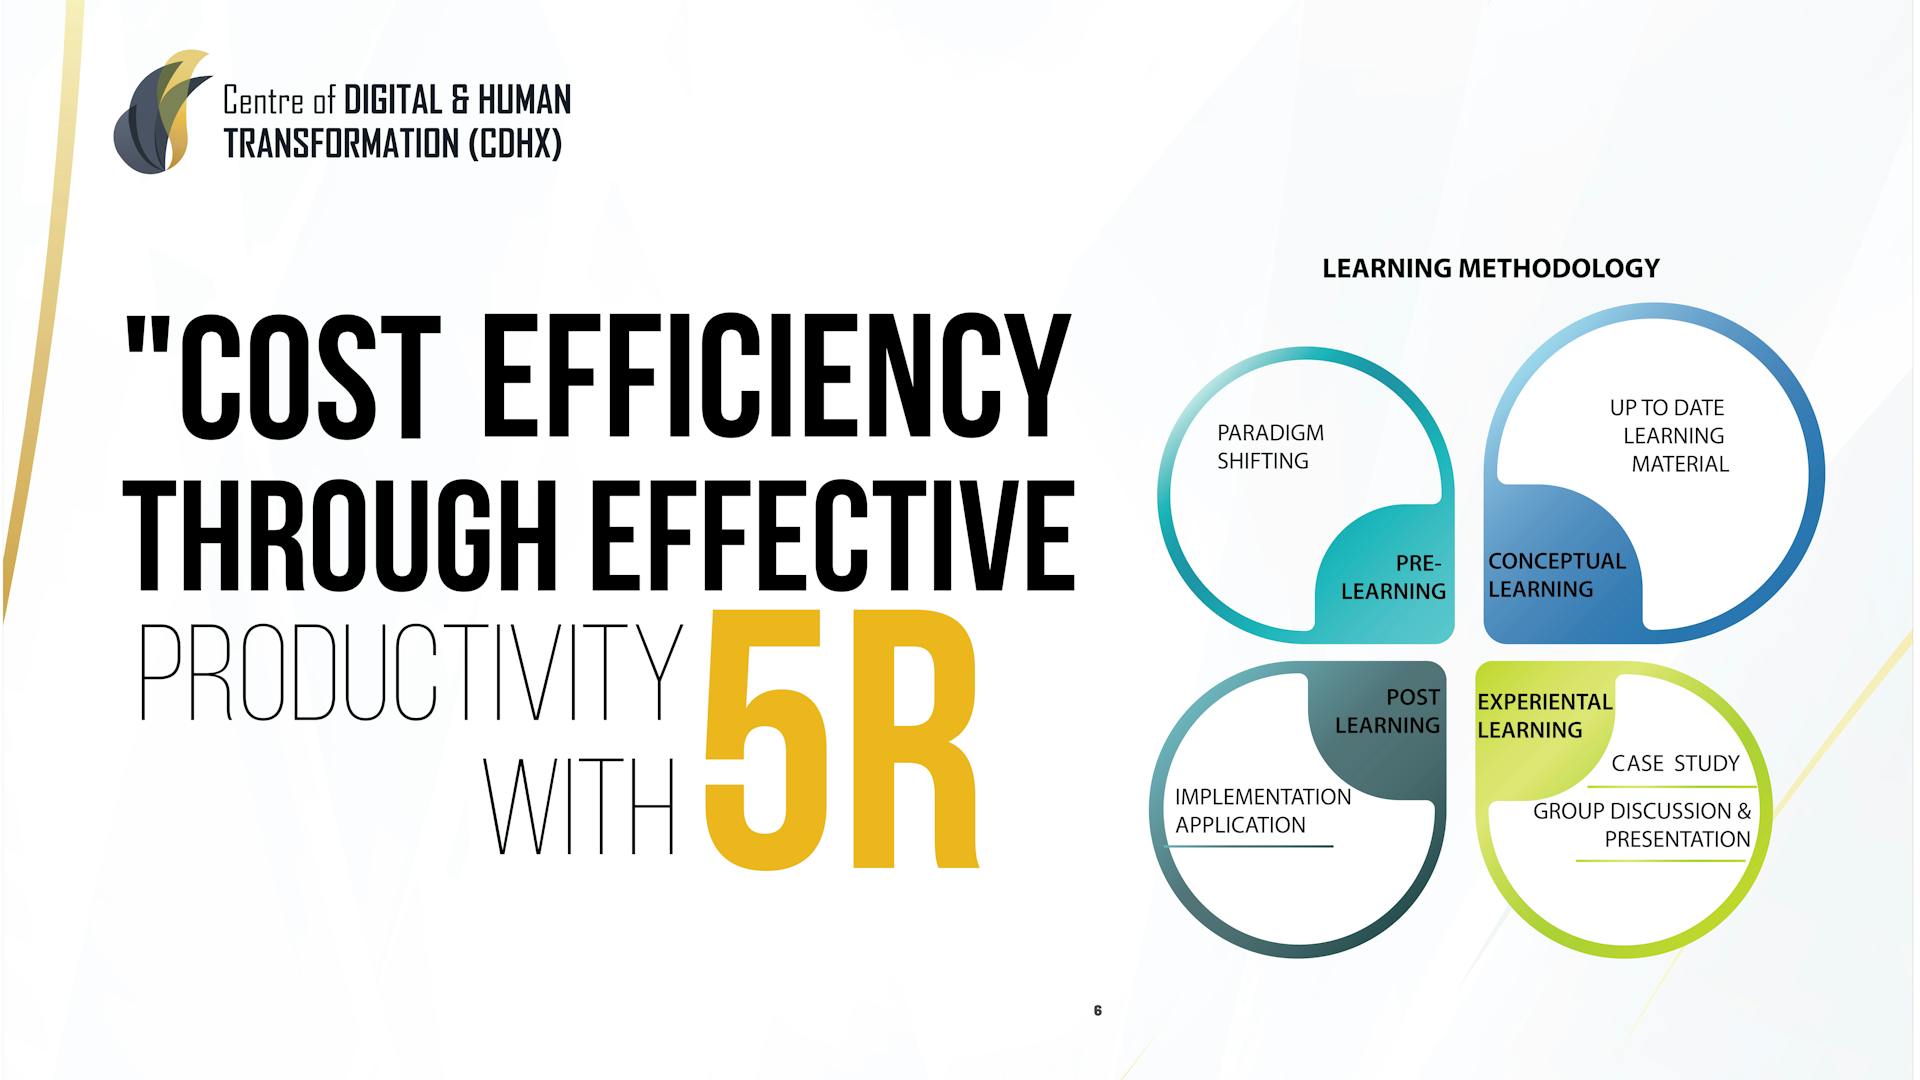 Cost Efficiency through effective productivity with 5R-01.jpg